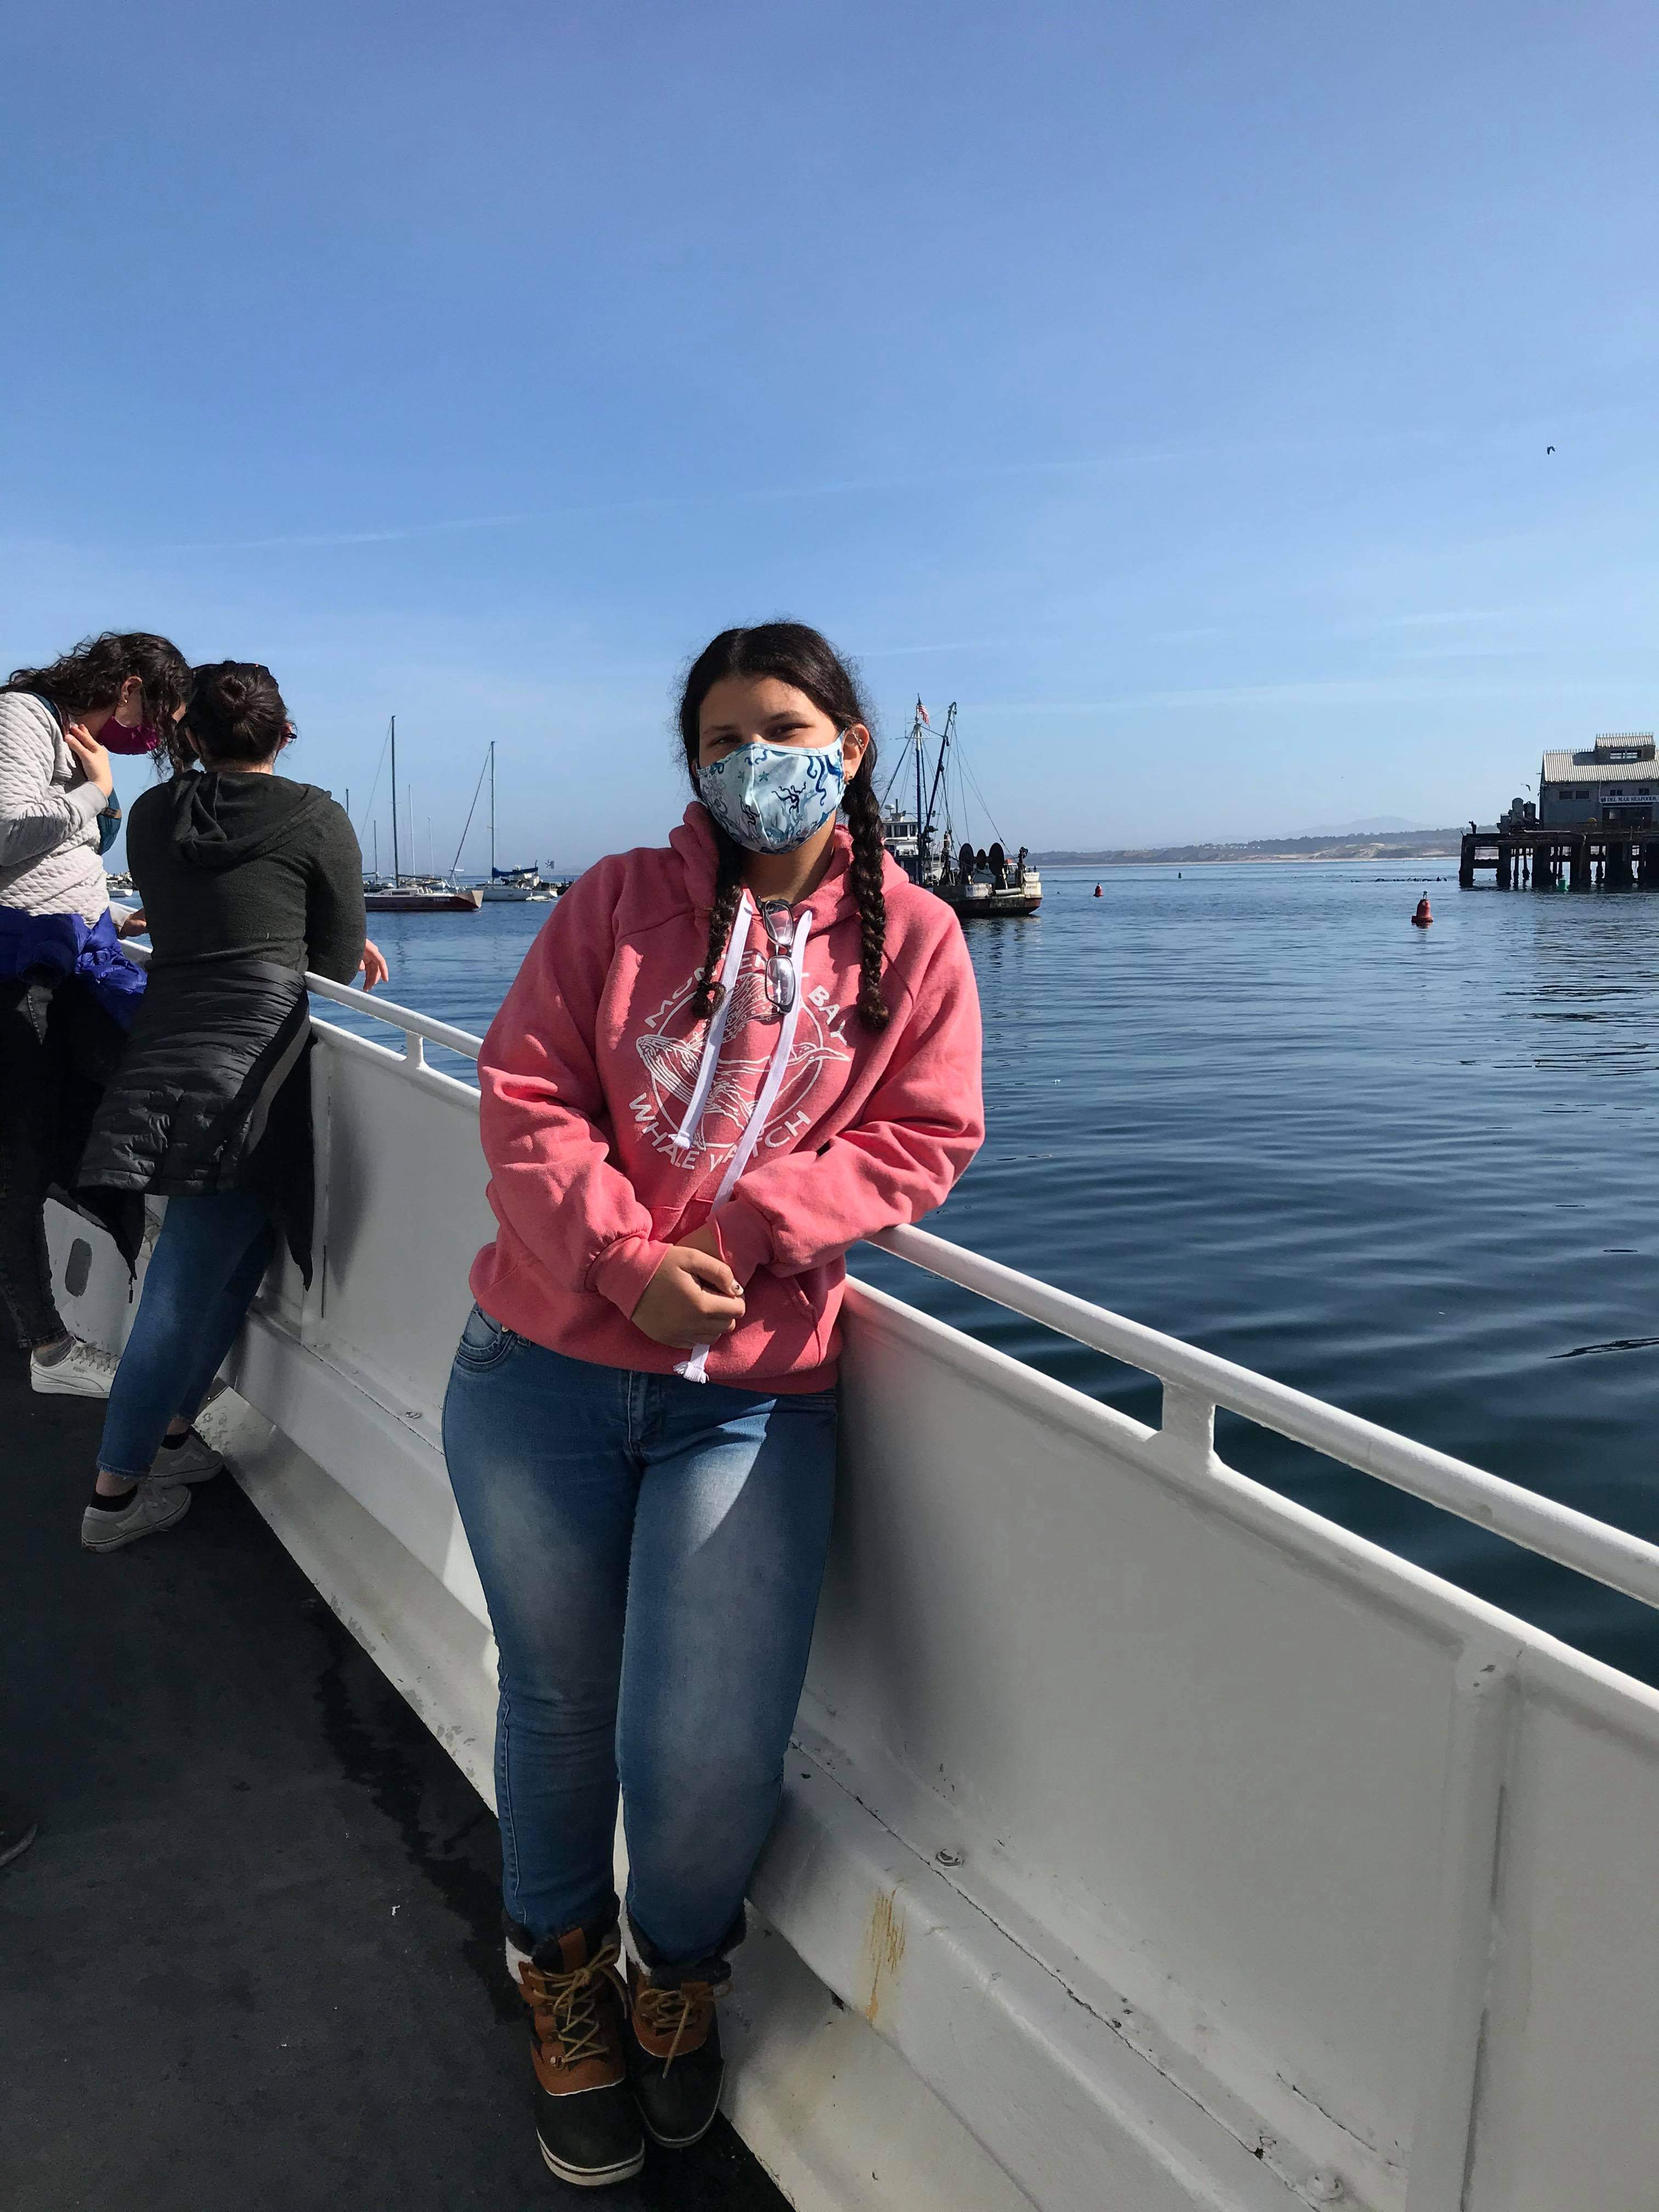 Student standing on a whale watching boat